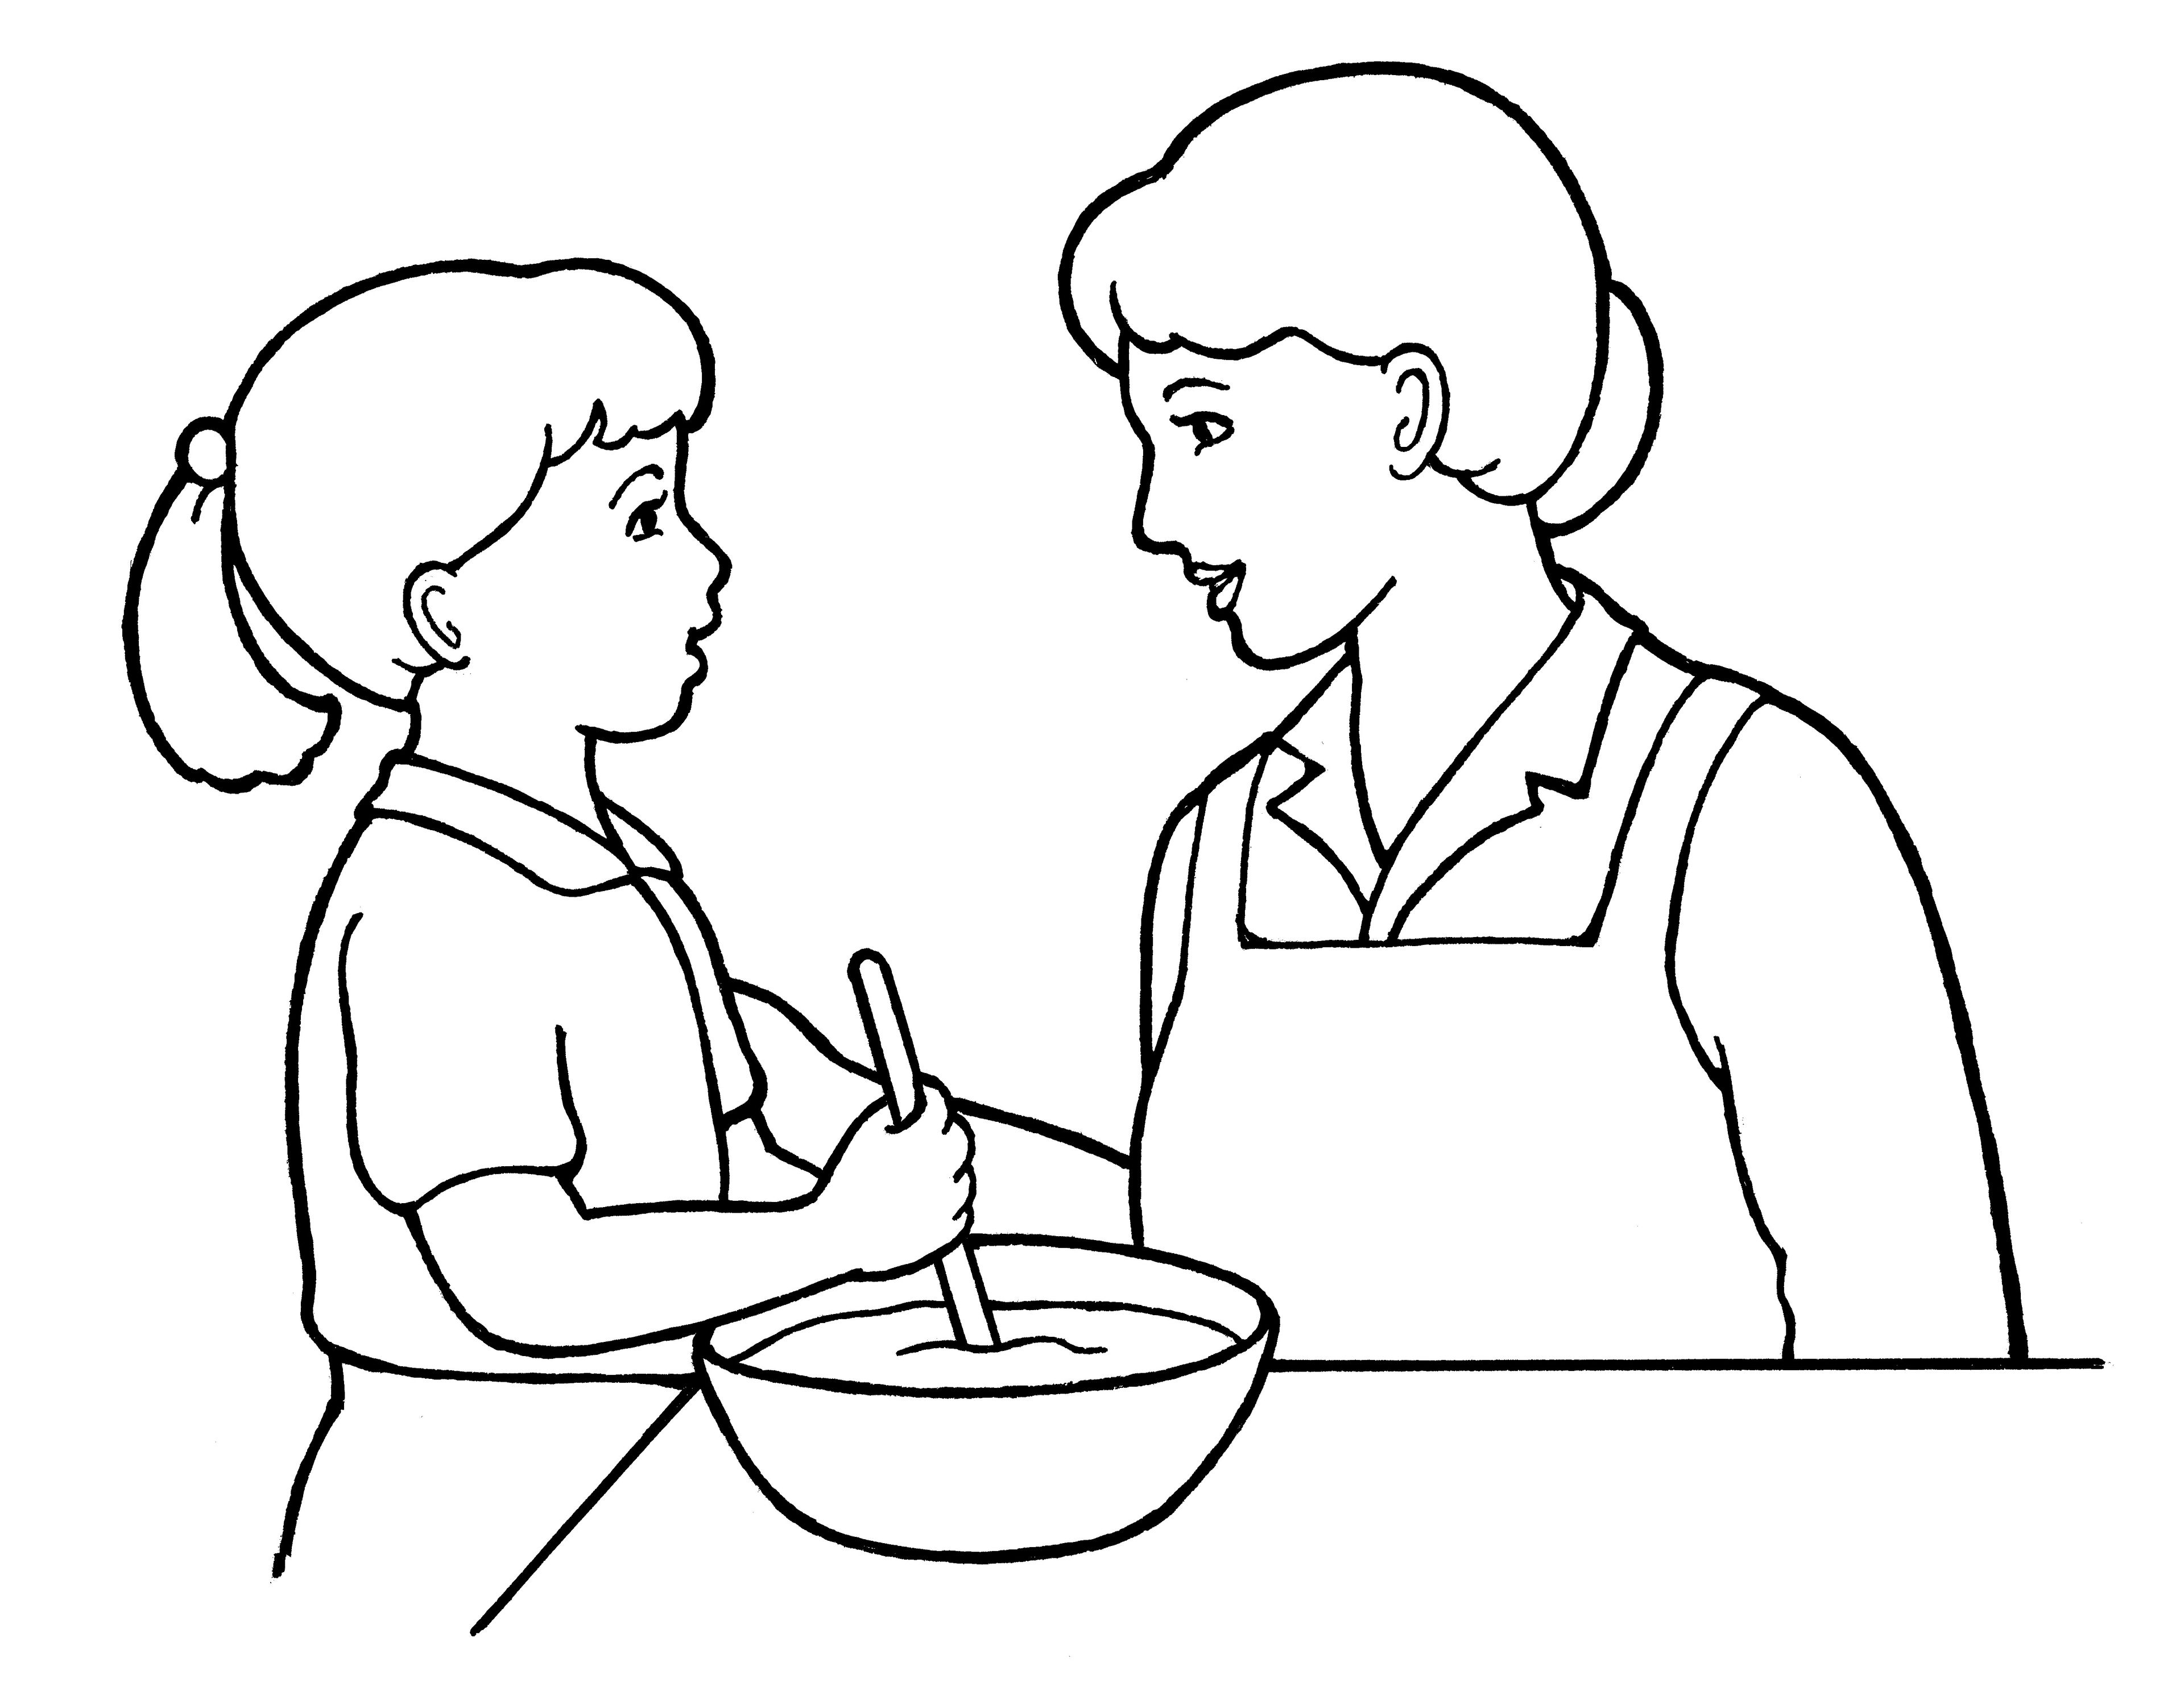 A line drawing of a woman and a little girl working in the kitchen, from the nursery manual Behold Your Little Ones (2008), page 31.